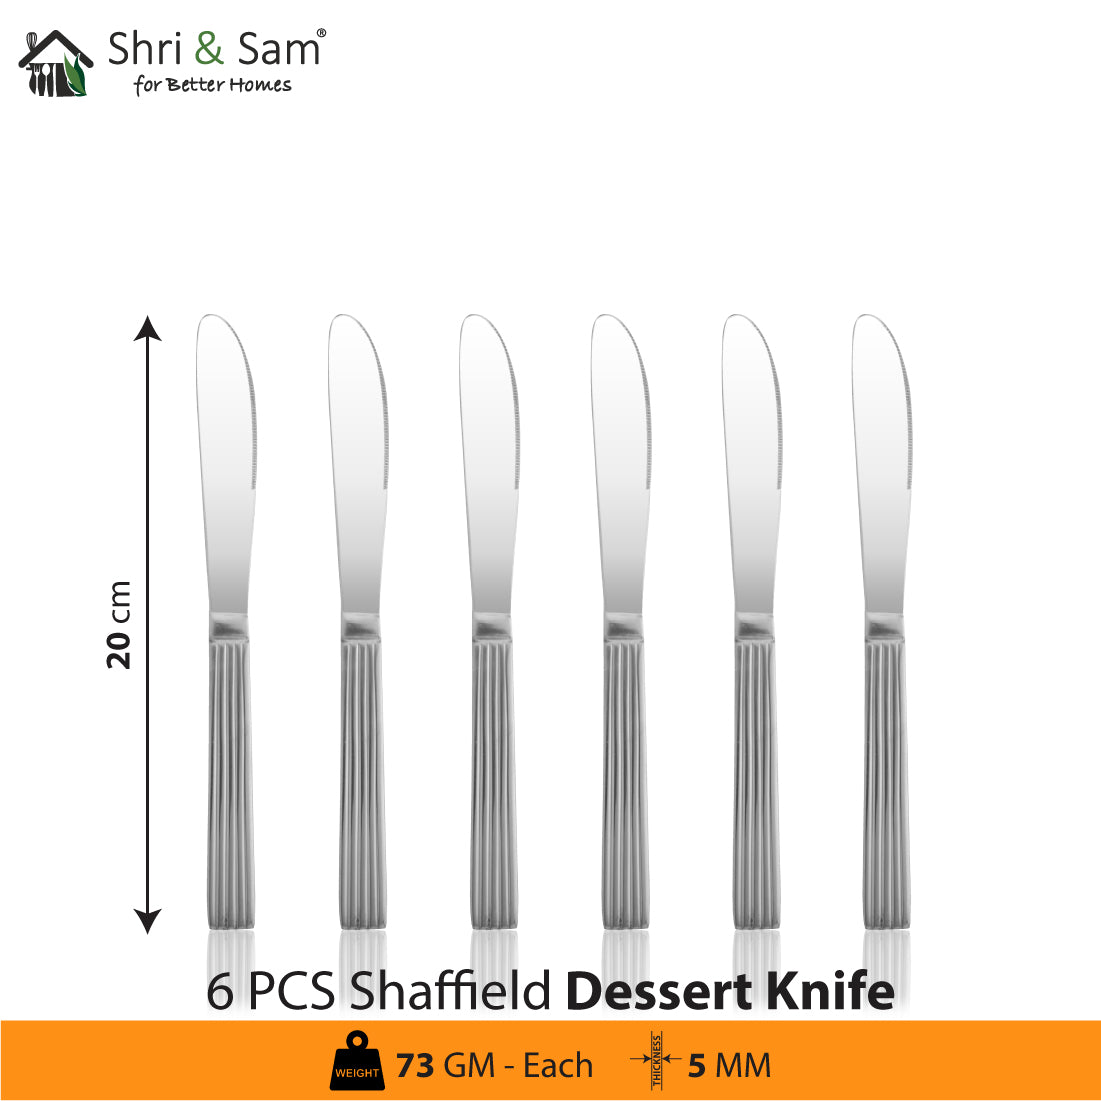 Stainless Steel 24 PCS Cutlery Set (6 Pcs Tea Spoon, 6 Pcs Dessert Spoon, 6 Pcs Dessert Fork and 6 Pcs Dessert Knife) with Leather Box Shaffield